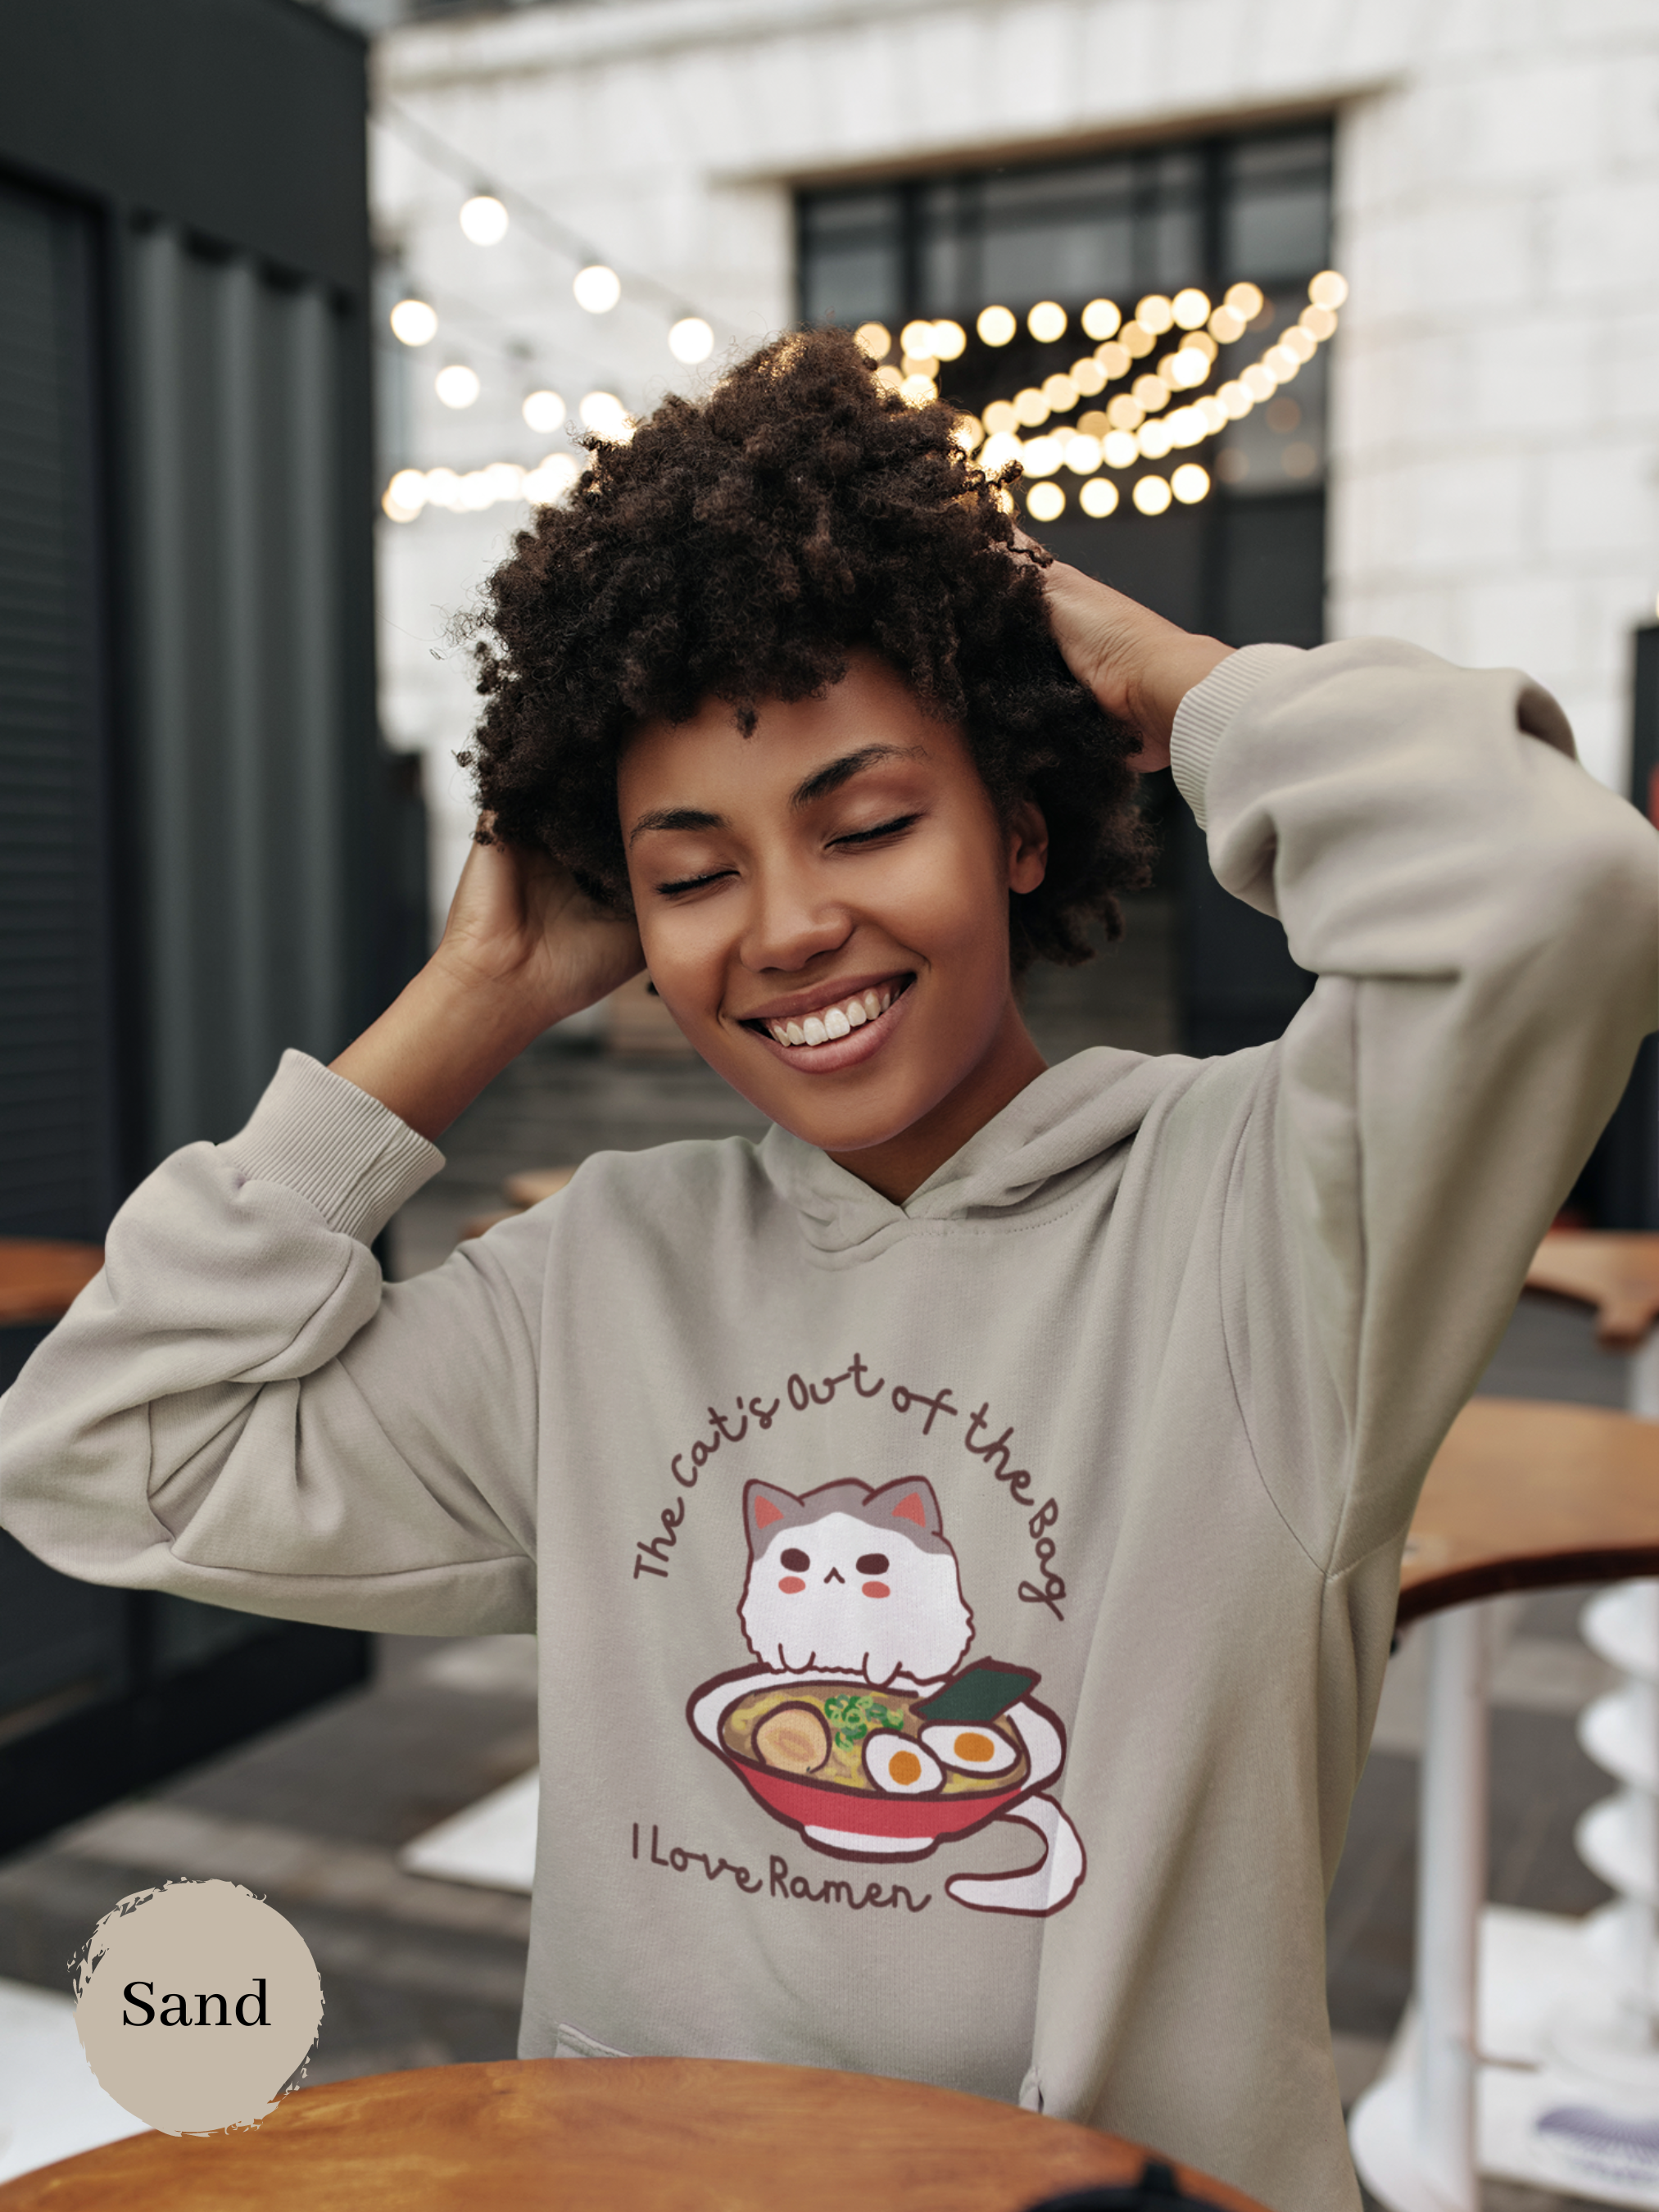 Ramen Hoodie - The Cat's Out of the Bag: A Playful and Punny Ramen Art and Foodie Hoodie for Cat and Noodle Lovers